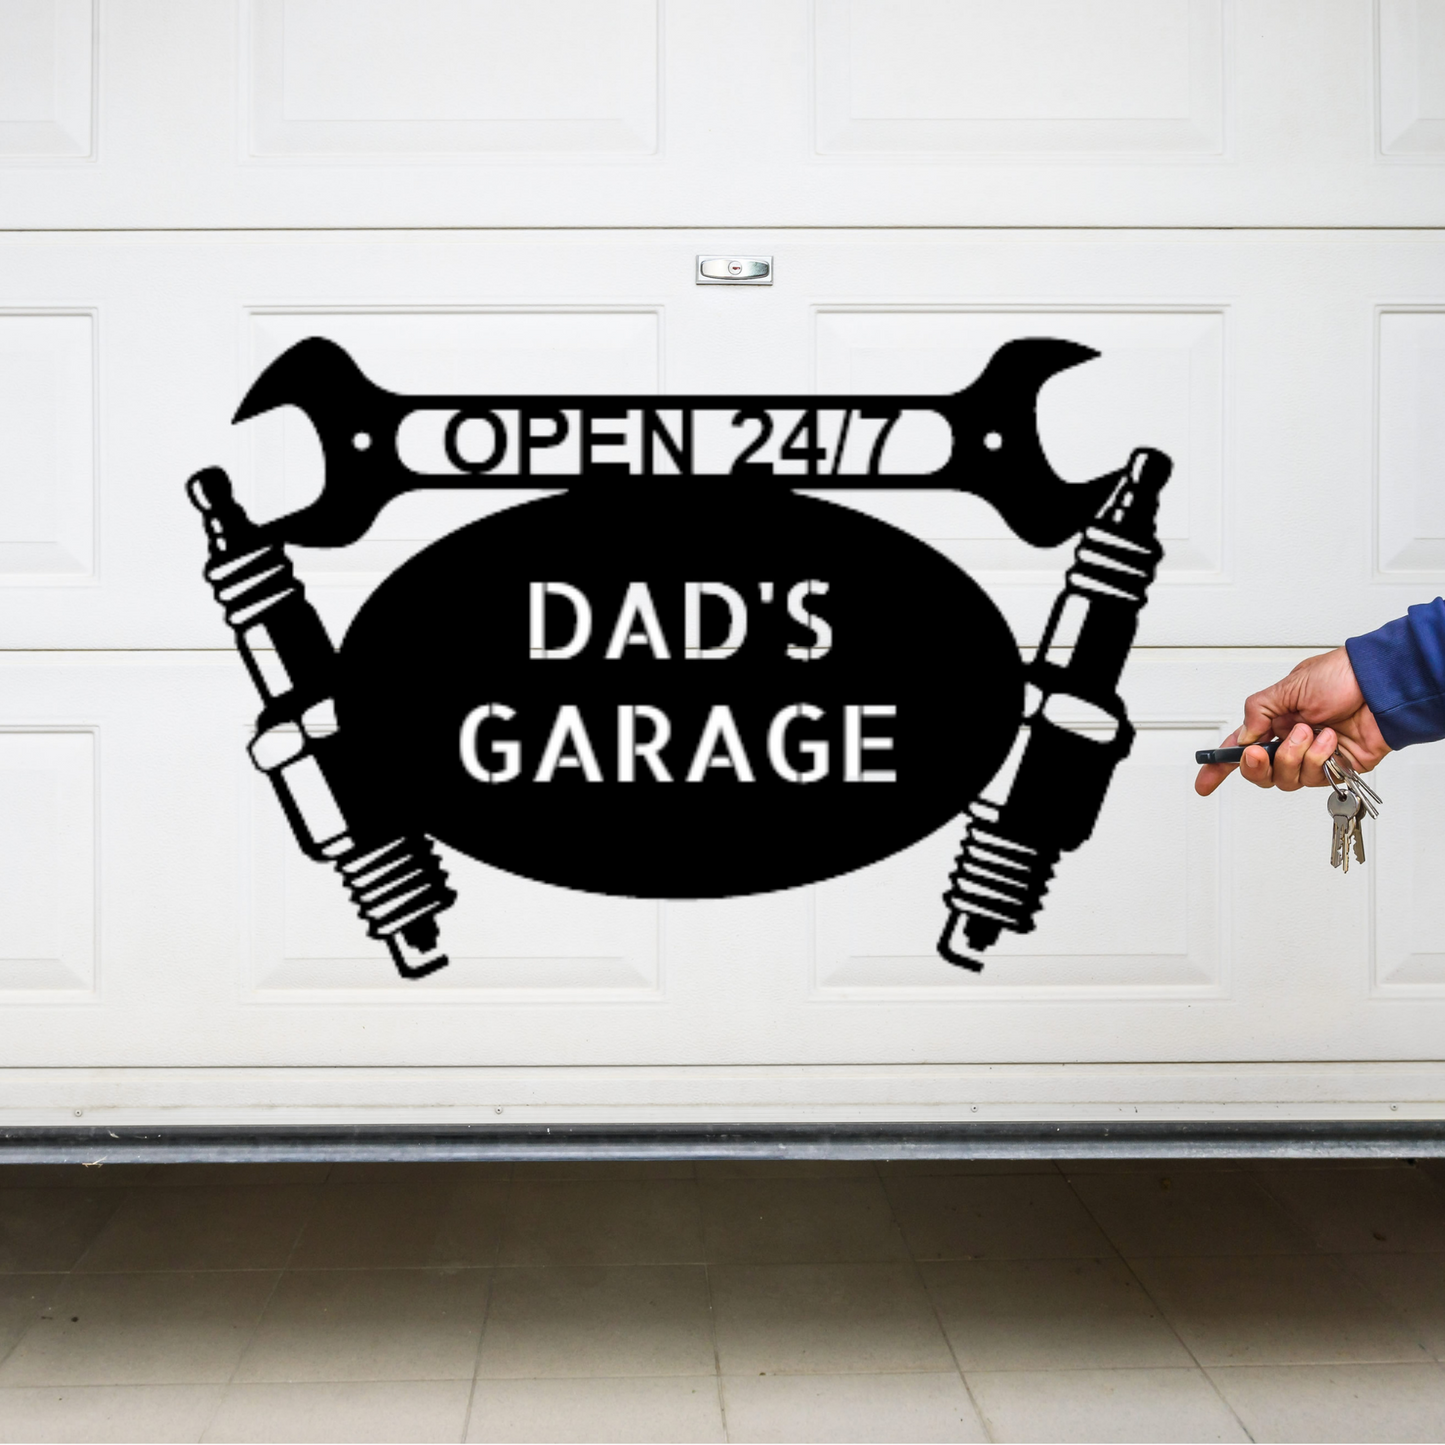 Car Garage Monogram - Steel Sign, Steel Signs, Personalized Metal Wall Decor, House Decor, Steel Signs, Personalized Metal Wall Decor